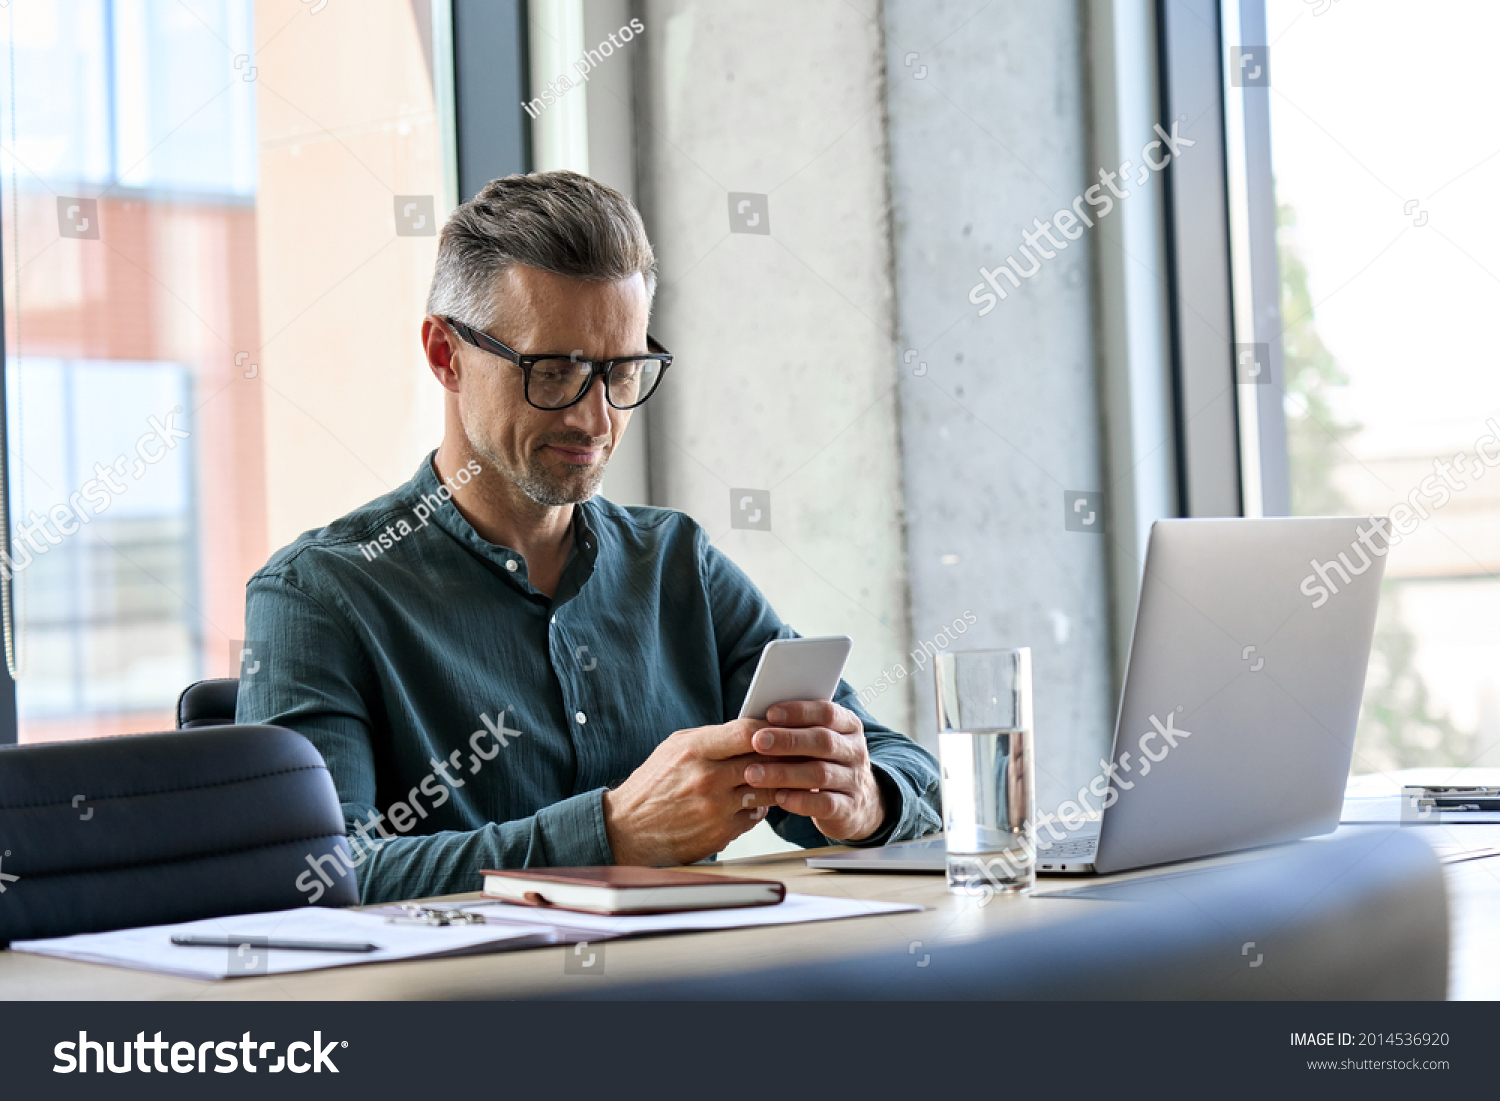 Smiling mature businessman holding smartphone sitting in office. Middle aged manager ceo using cell phone mobile apps and laptop. Digital technology applications and solutions for business development #2014536920